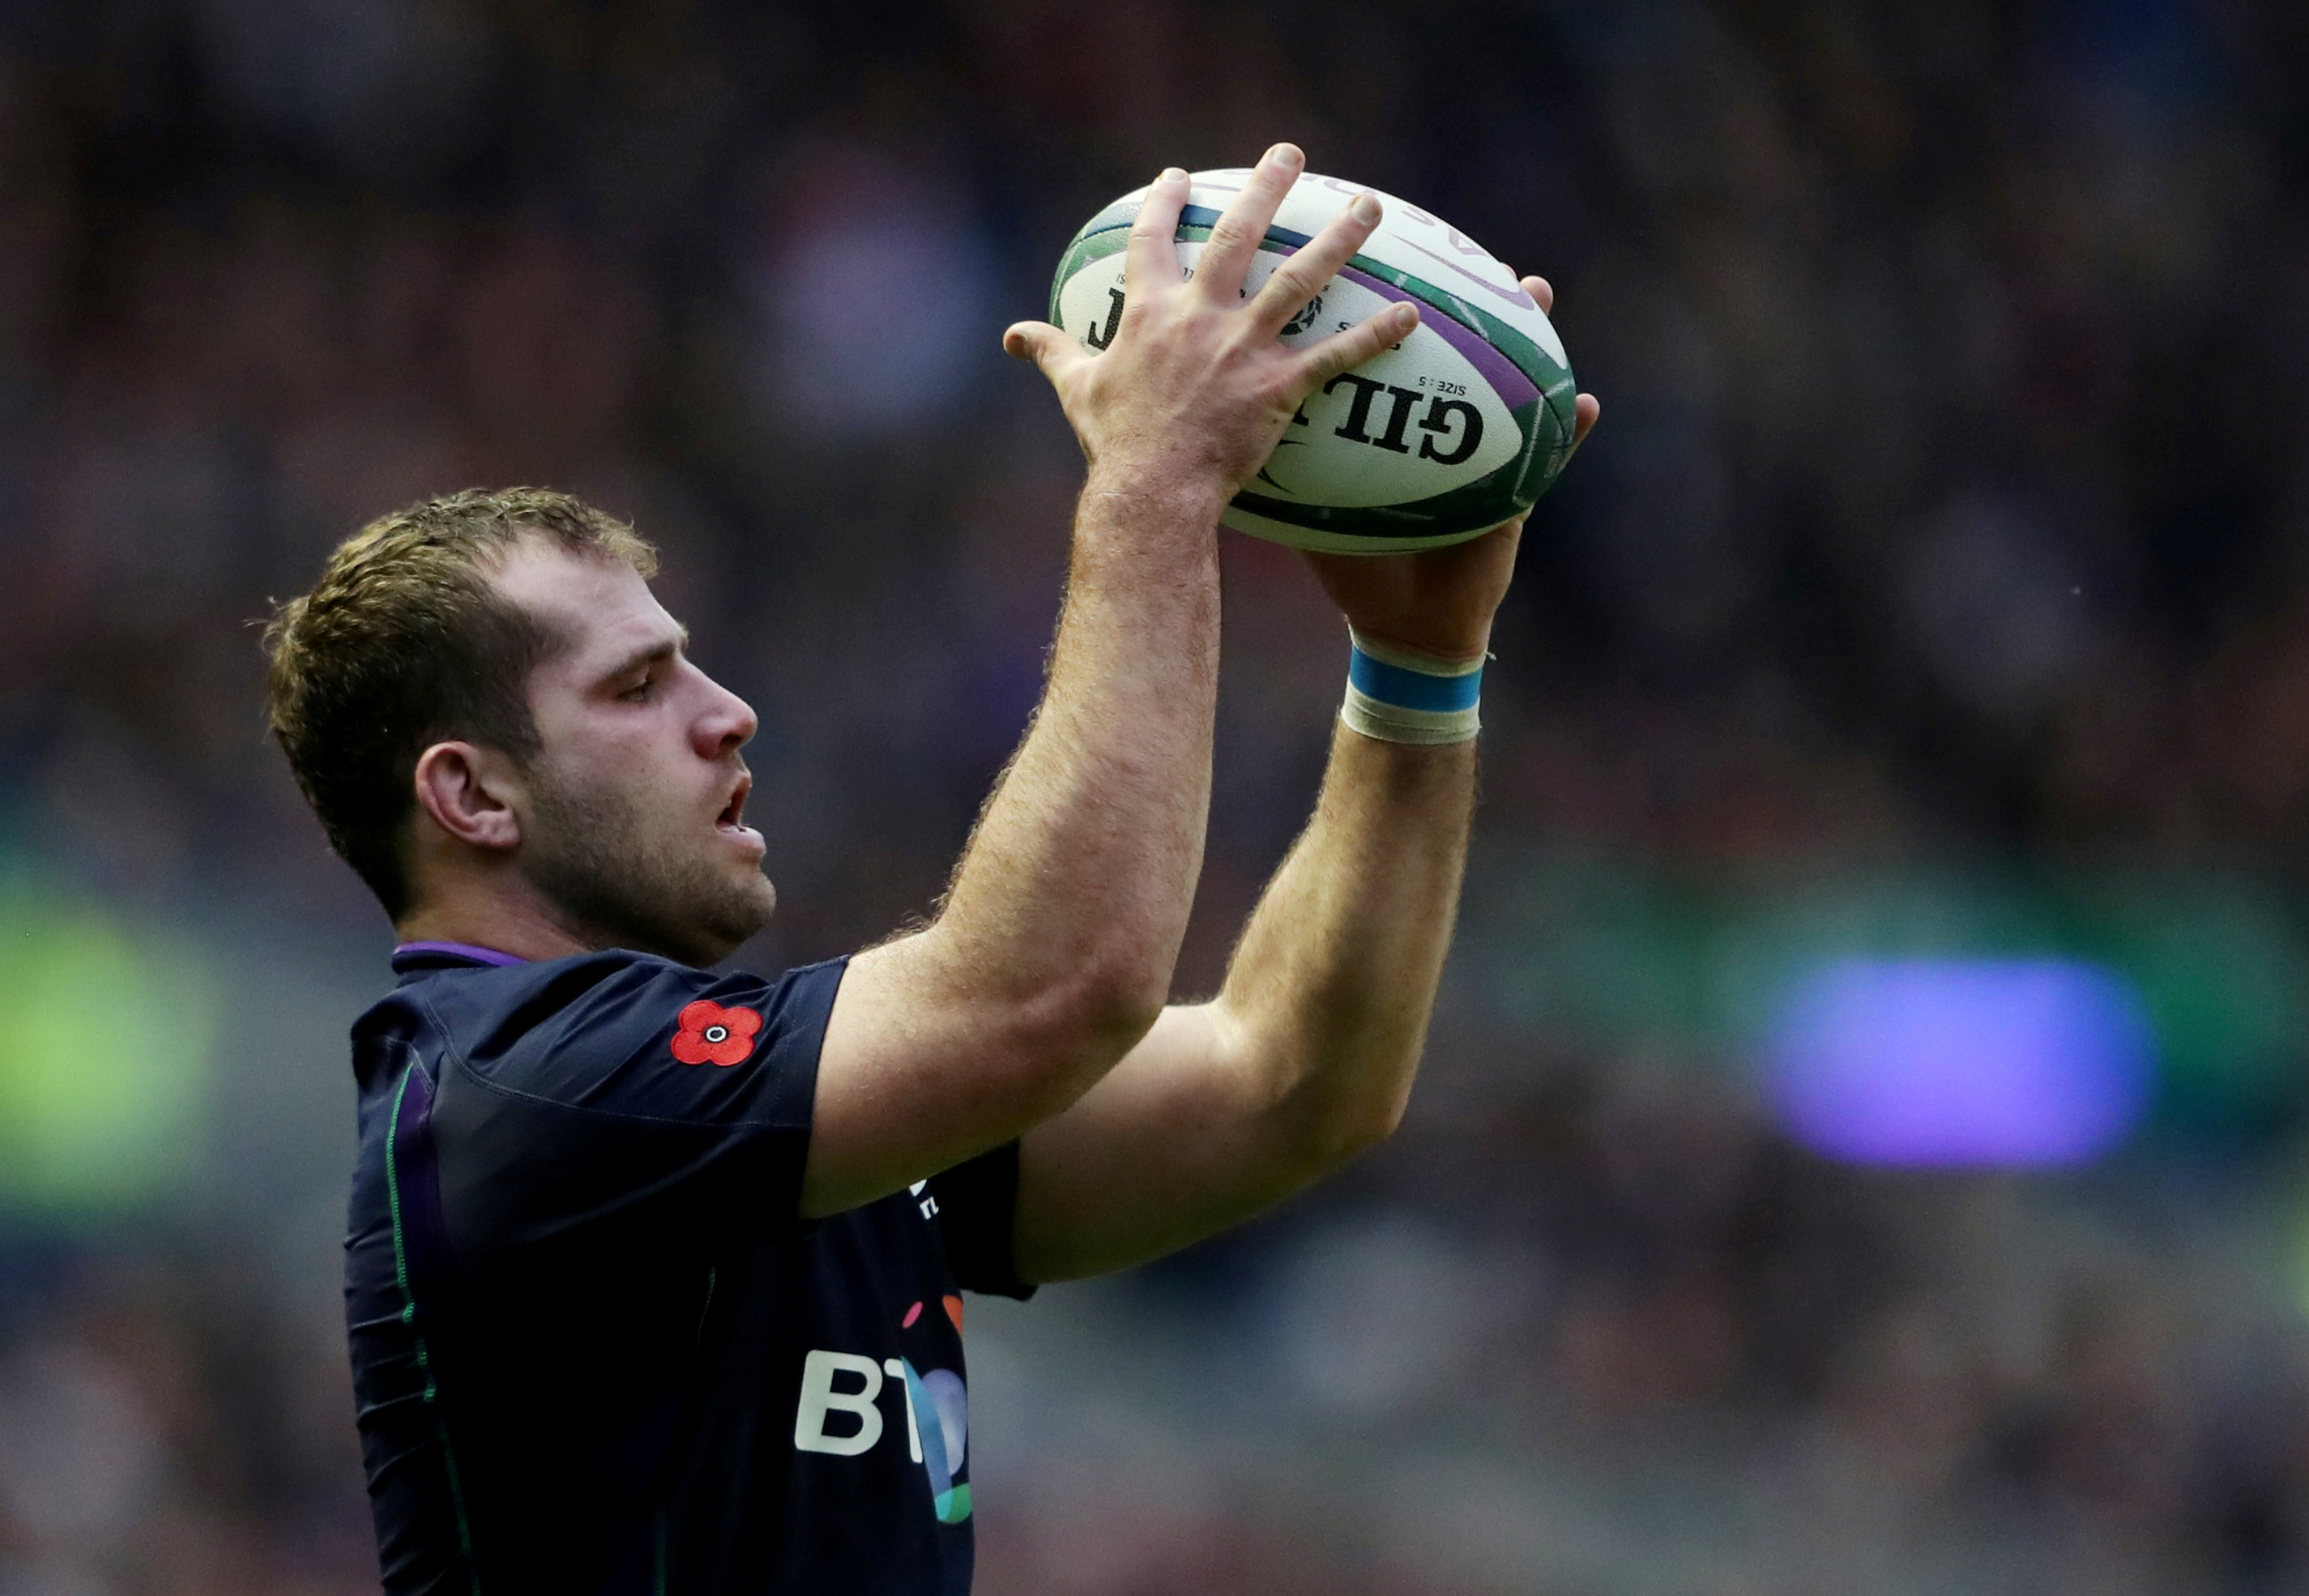 No complaints about tight schedule, says Scotland hooker Brown